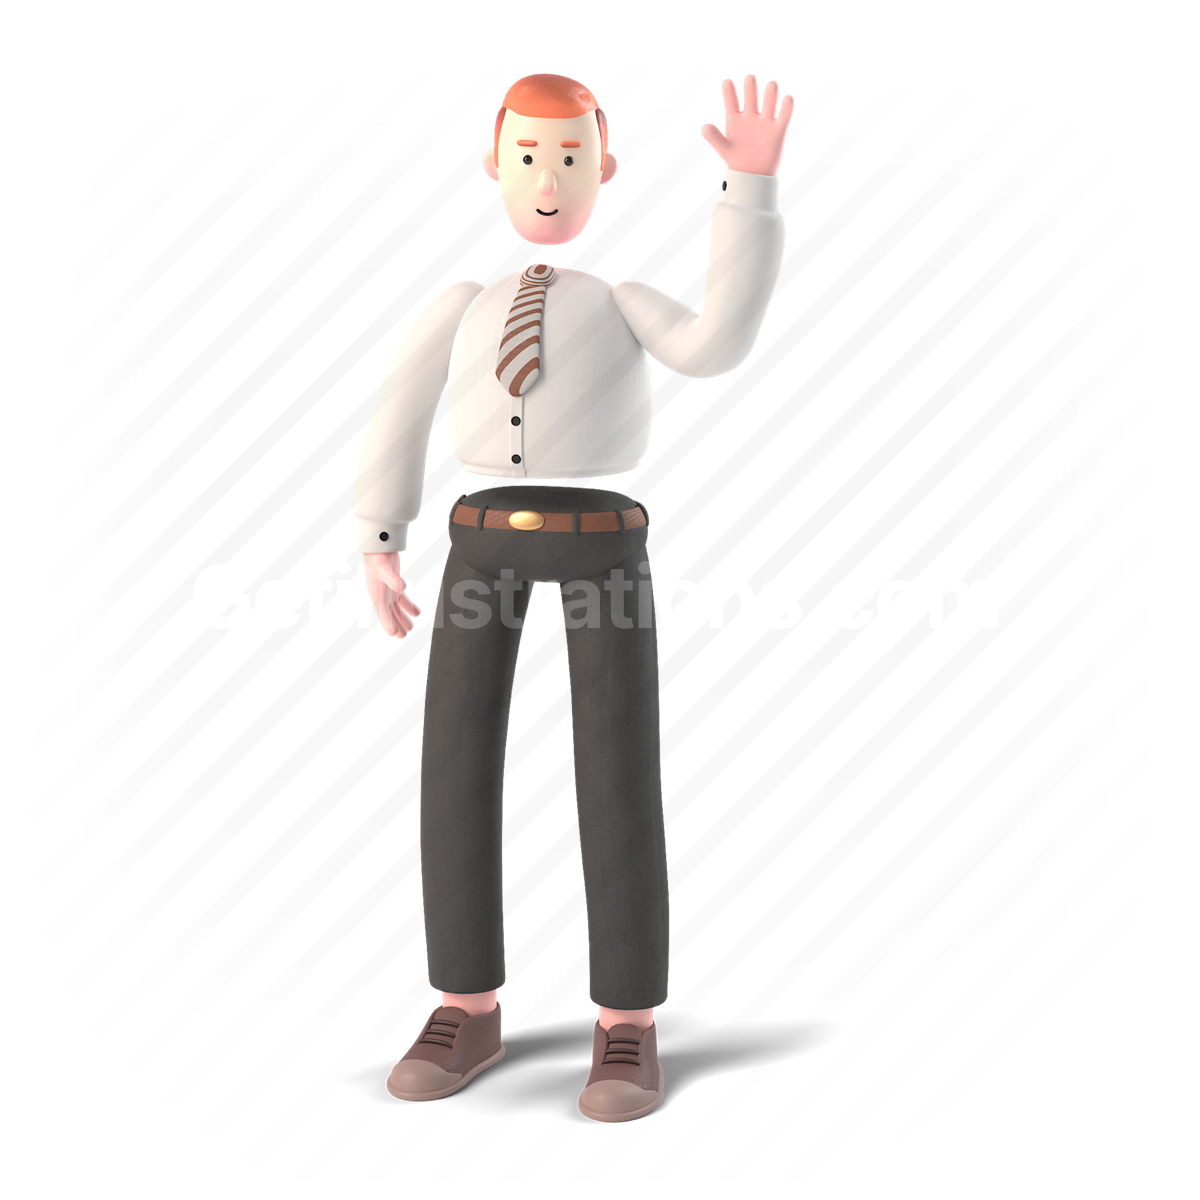 3d, people, person, wave, greeting, hello, waving, formal, suit, tie